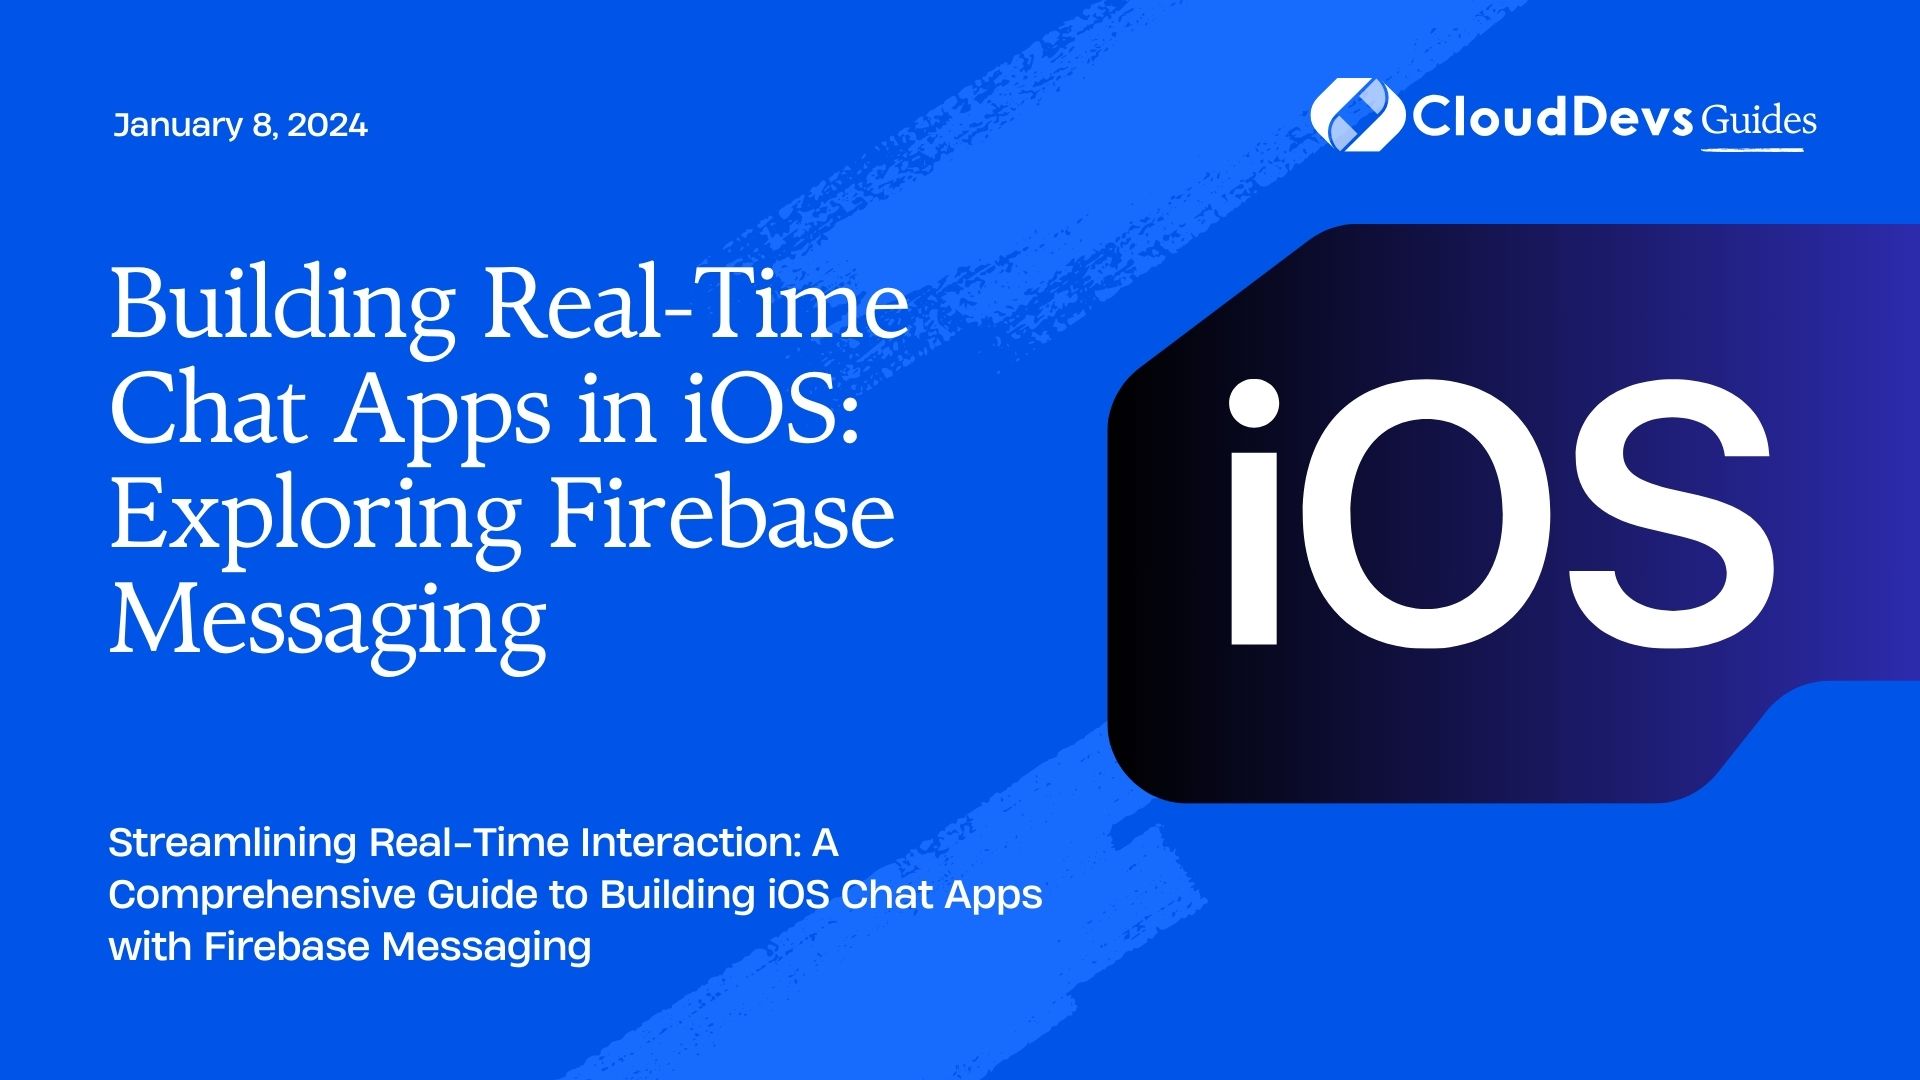 Building Real-Time Chat Apps in iOS: Exploring Firebase Messaging